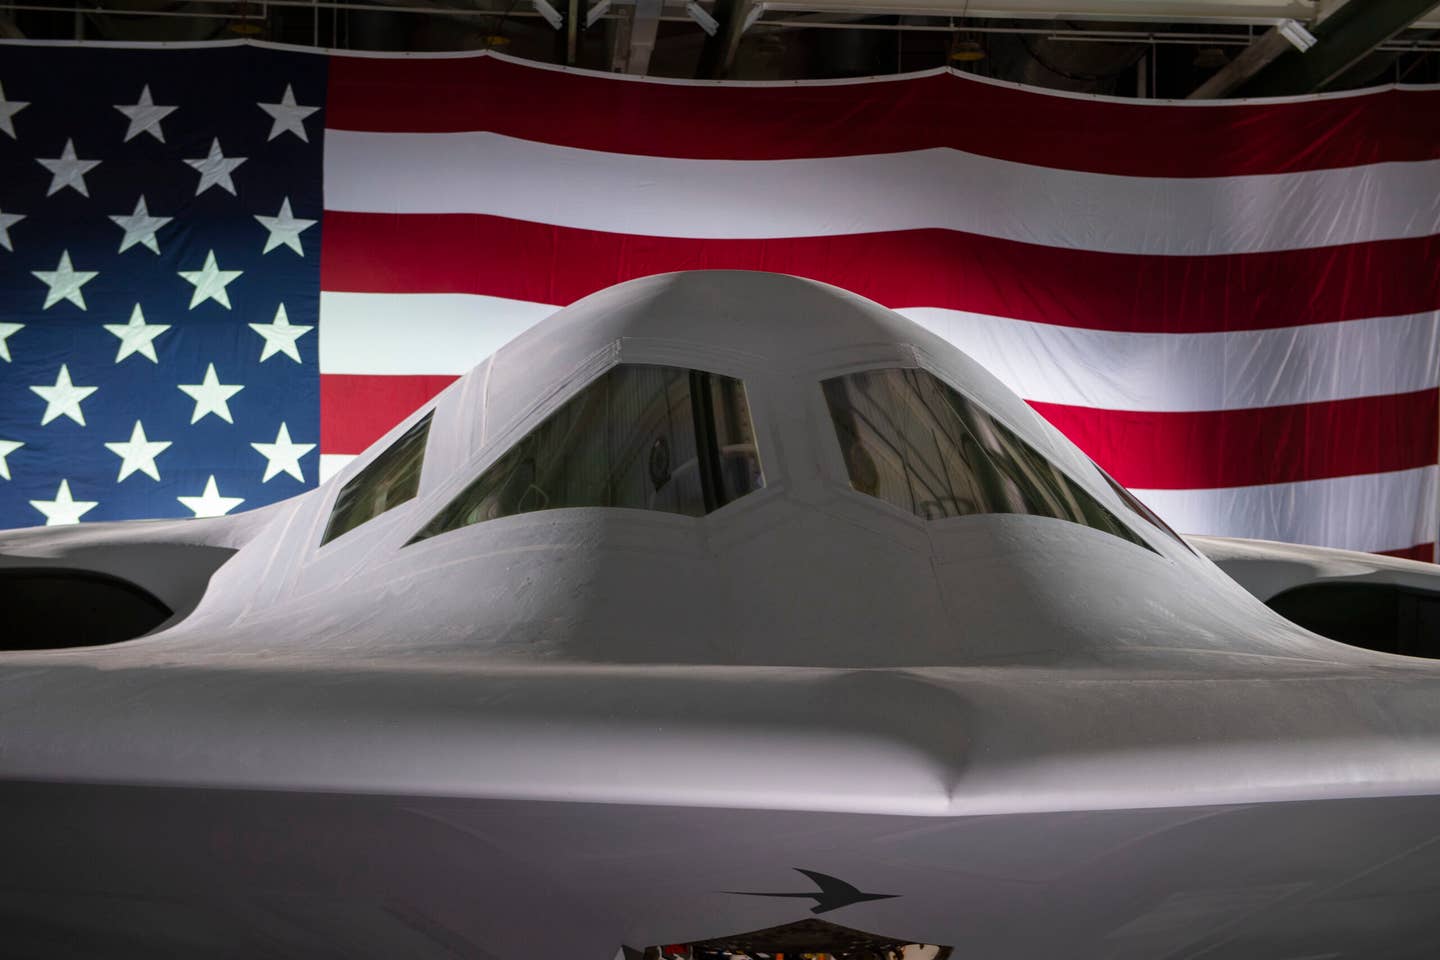 The B-21 Raider was unveiled to the public at a ceremony on December 2, 2022, in Palmdale, California. Designed to operate in tomorrow's high-end threat environment, the B-21 will play a critical role in ensuring America's enduring airpower capability. (U.S. Air Force photo)